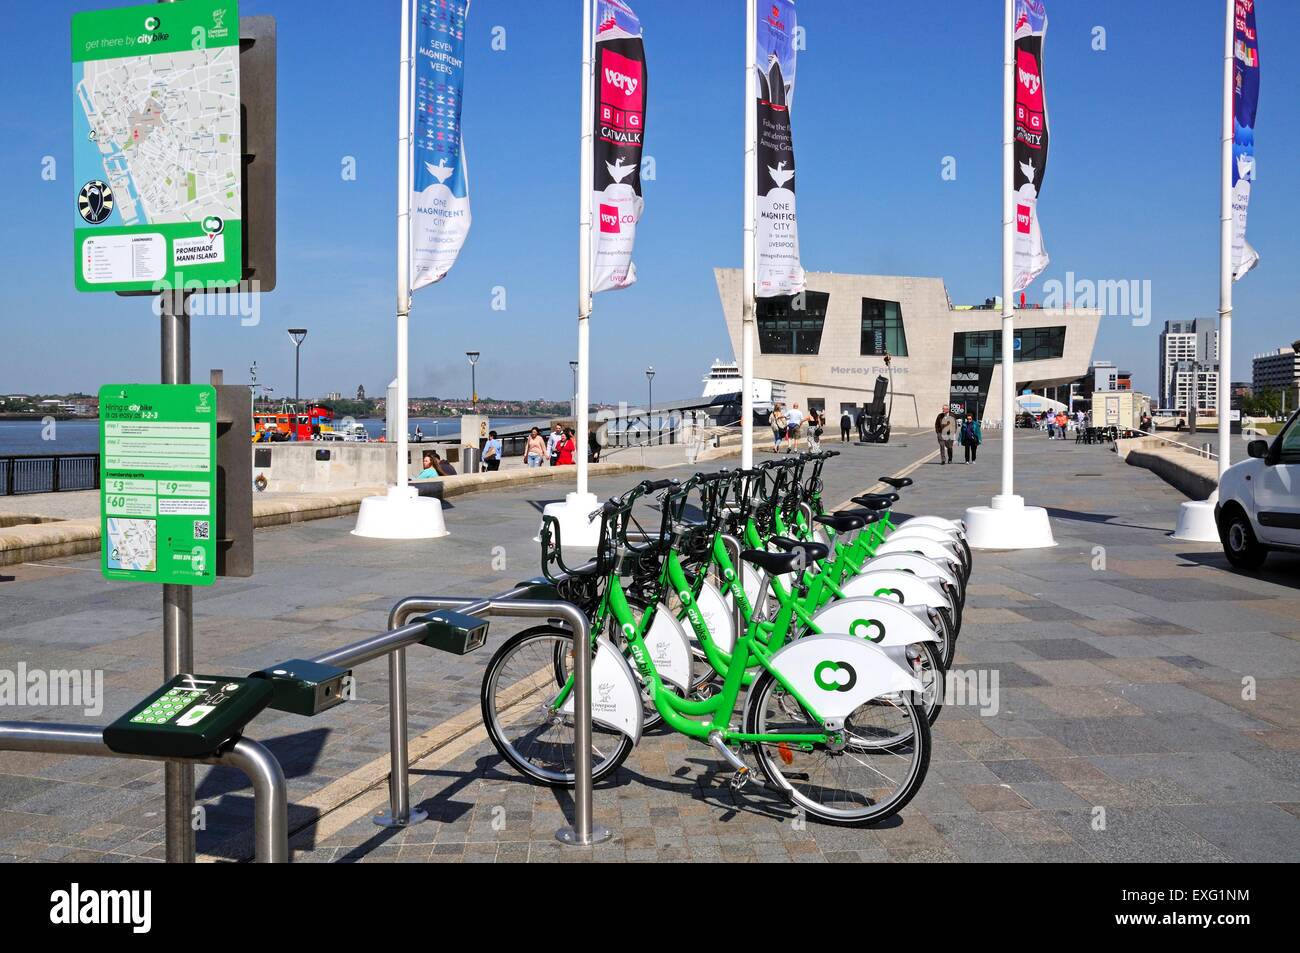 Row of city hire bikes for rent along the waterfront at Pier Head with the Mersey Ferries building to the rear, Liverpool, UK. Stock Photo